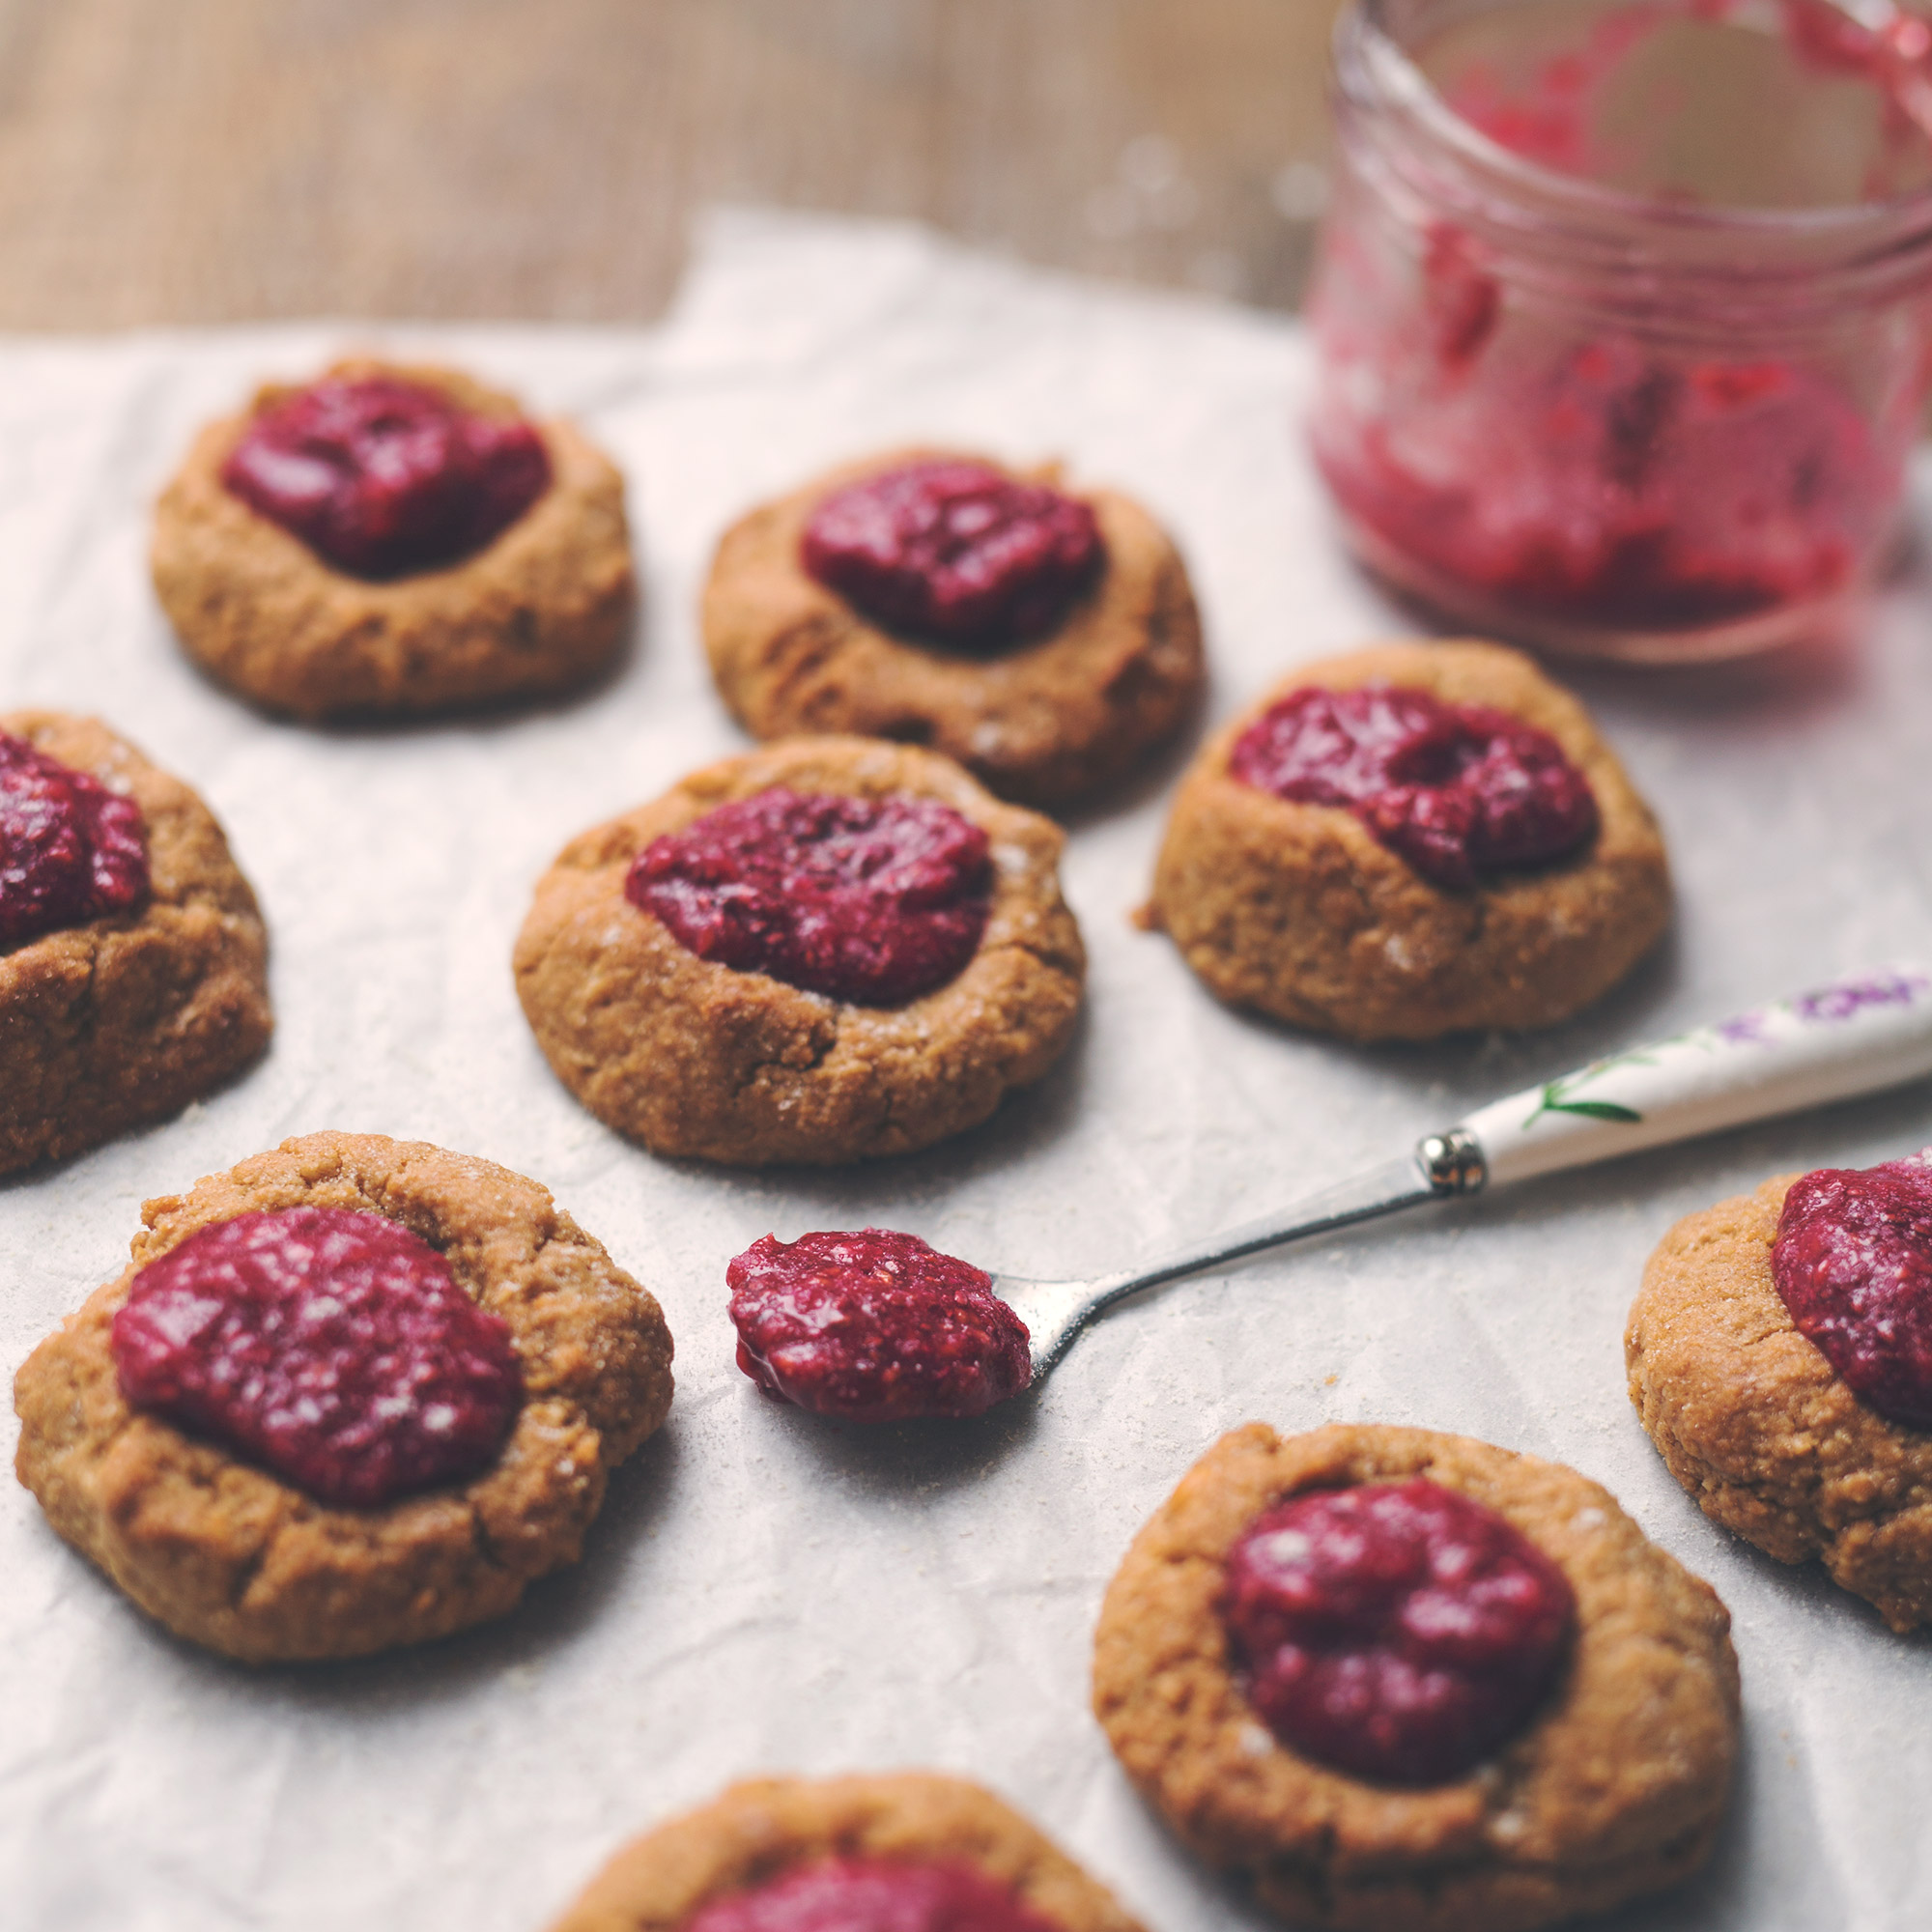 Peanut Butter & Jelly Thumbprint Cookies with Raspberry Chia Jam